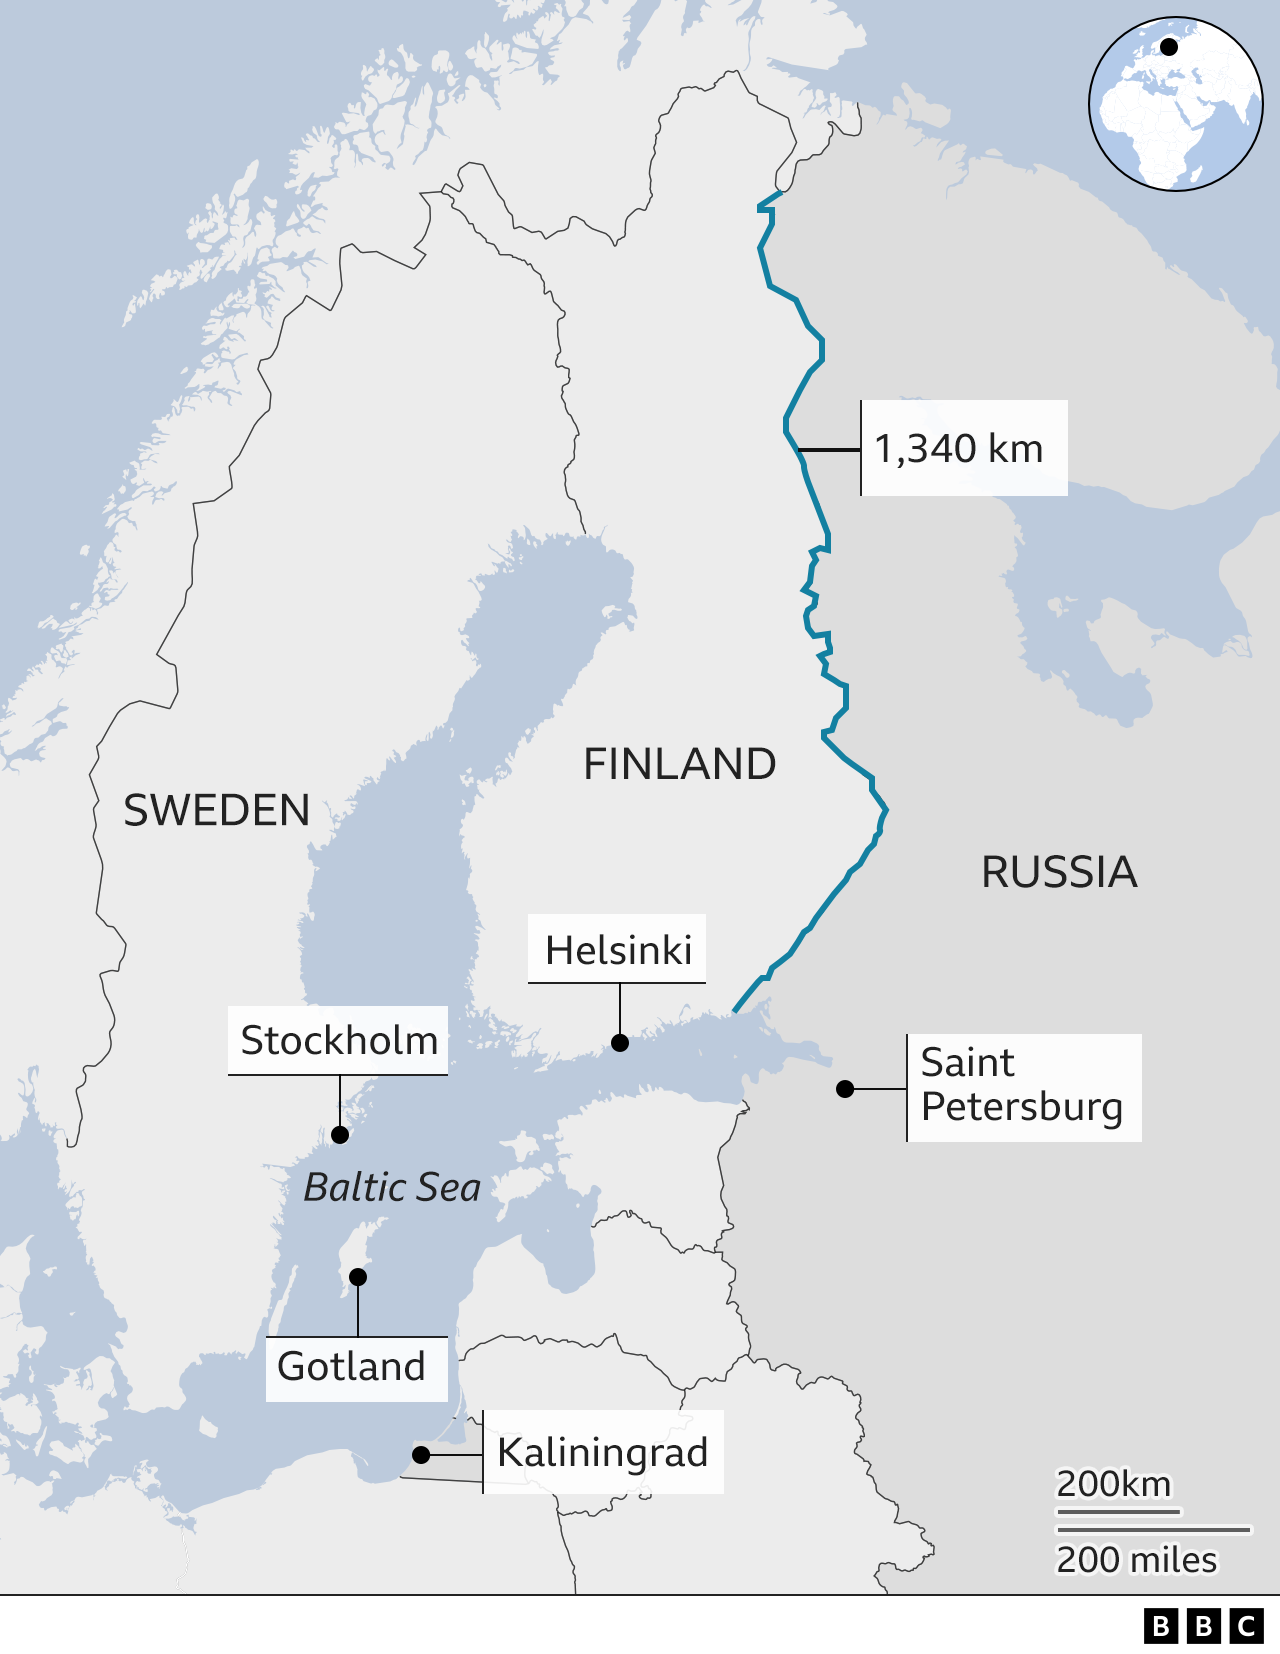 Sweden and Finland's journey from neutral to Nato - BBC News